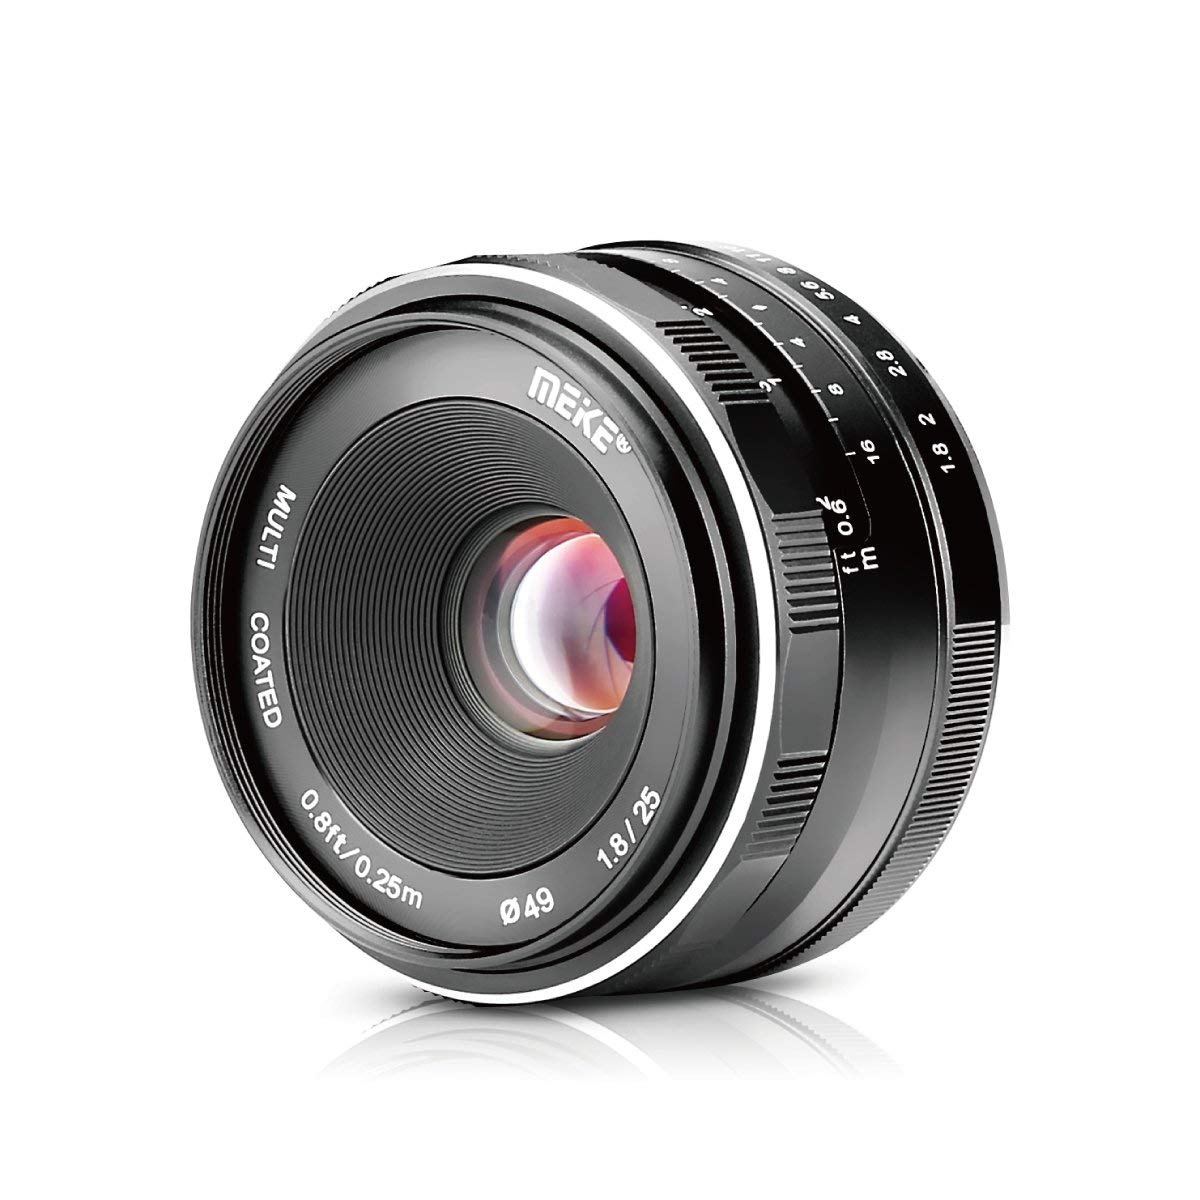 Meike 25mm f/1.8 Large Aperture Wide Angle Lens Manual Focus Lens for Canon EOS-M Mount Mirrorless Cameras